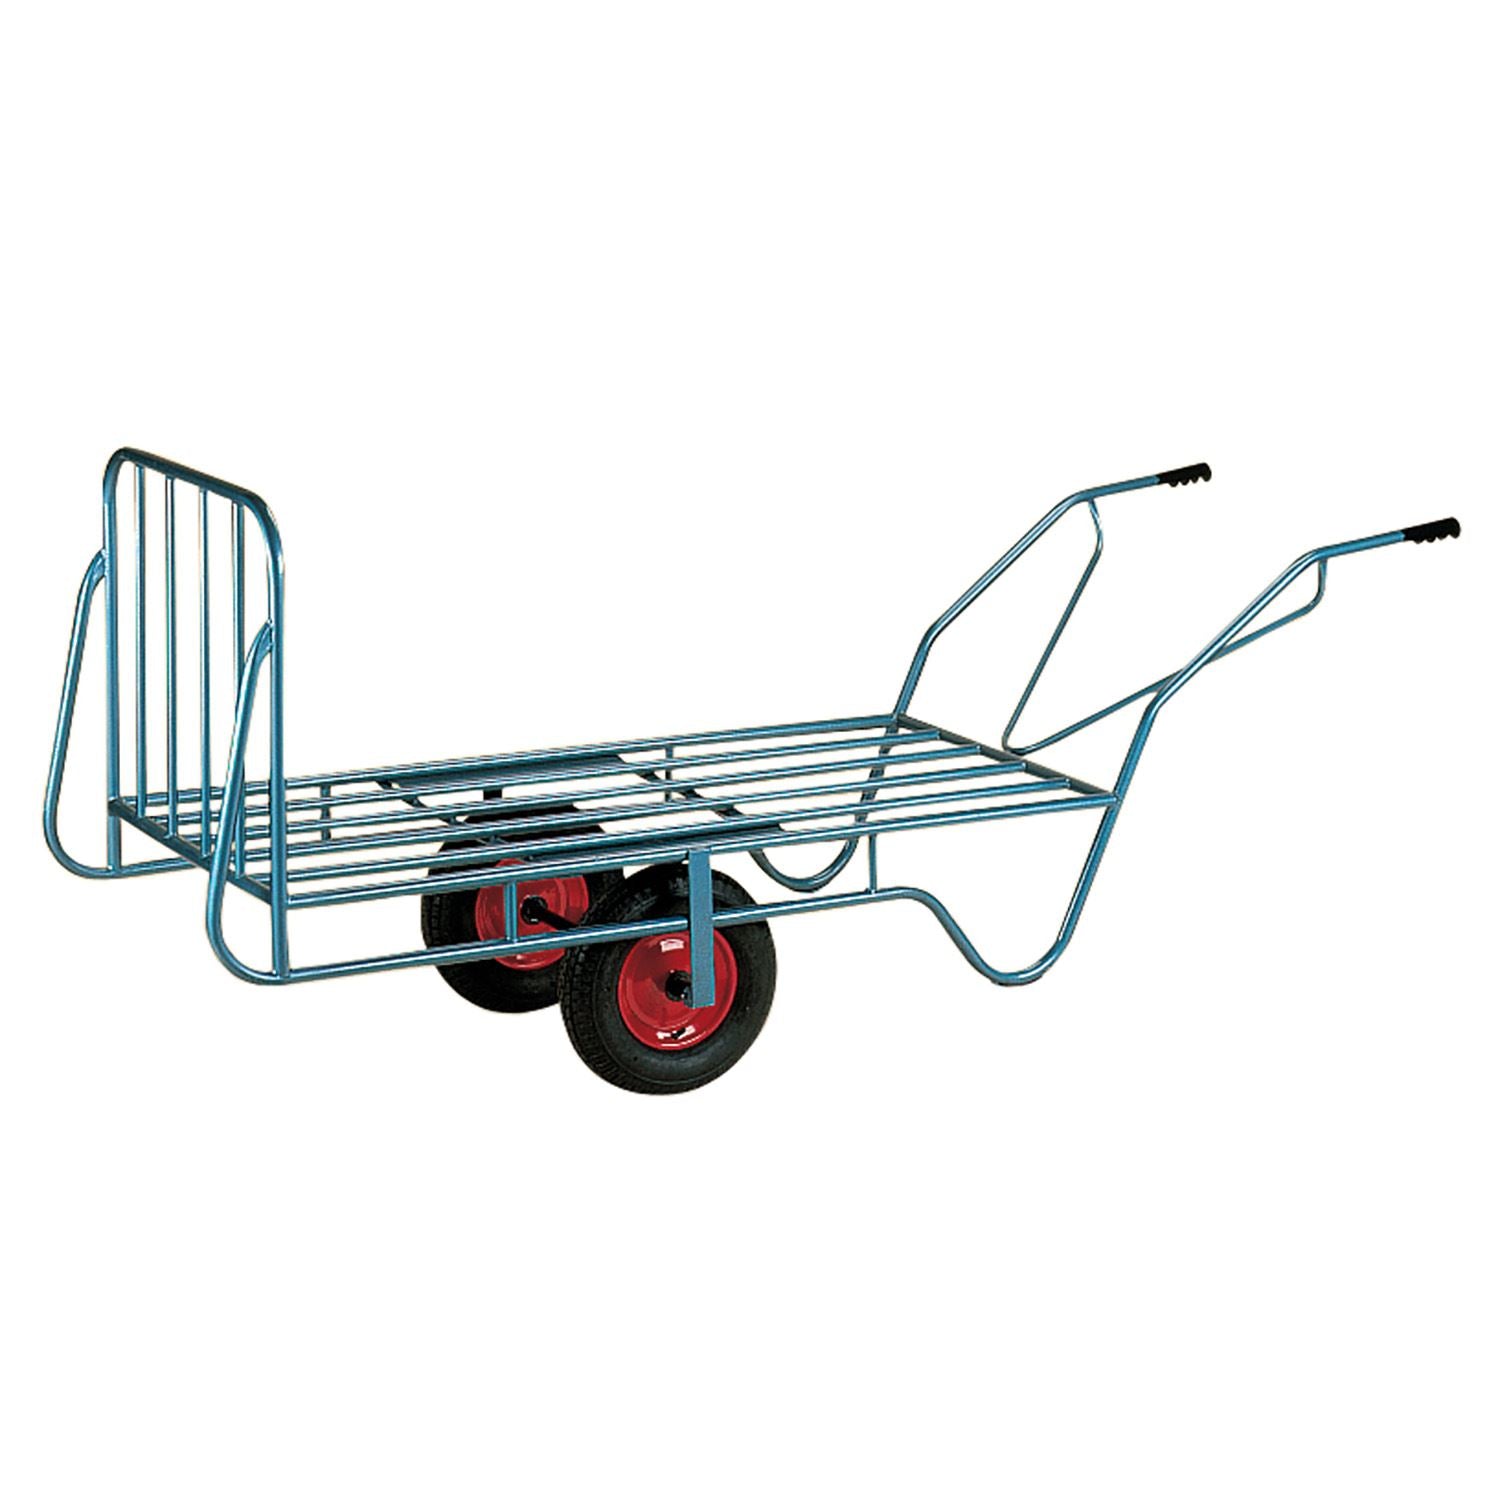 Stubbs Bale & Feed Trolley S2290 - Just Horse Riders